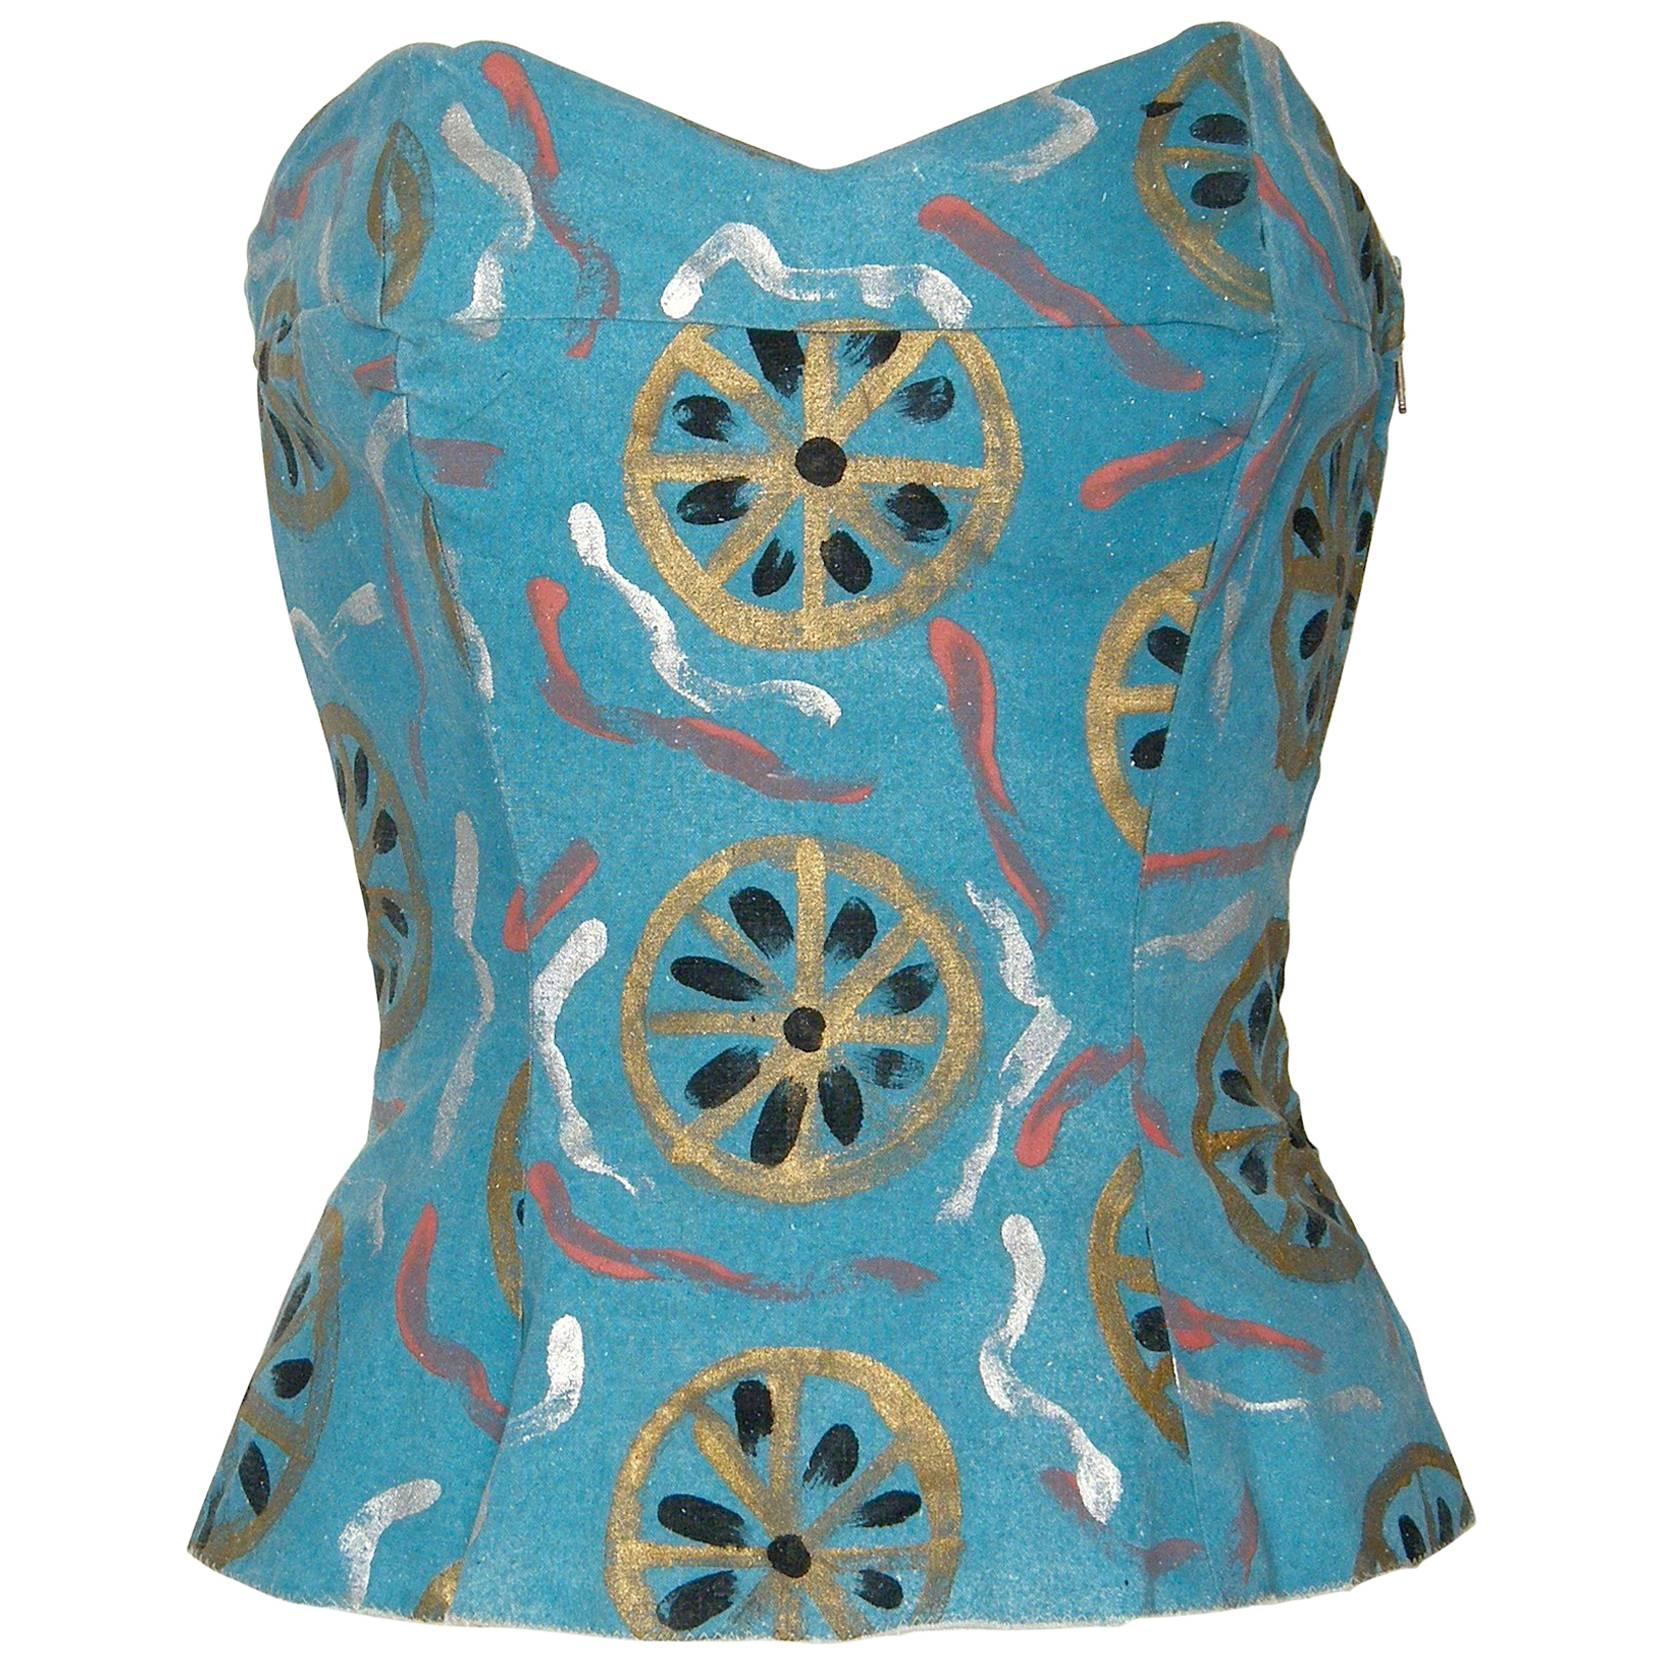 Early Emilio Pucci Strapless Bustier Sun Top Hand Painted Cotton